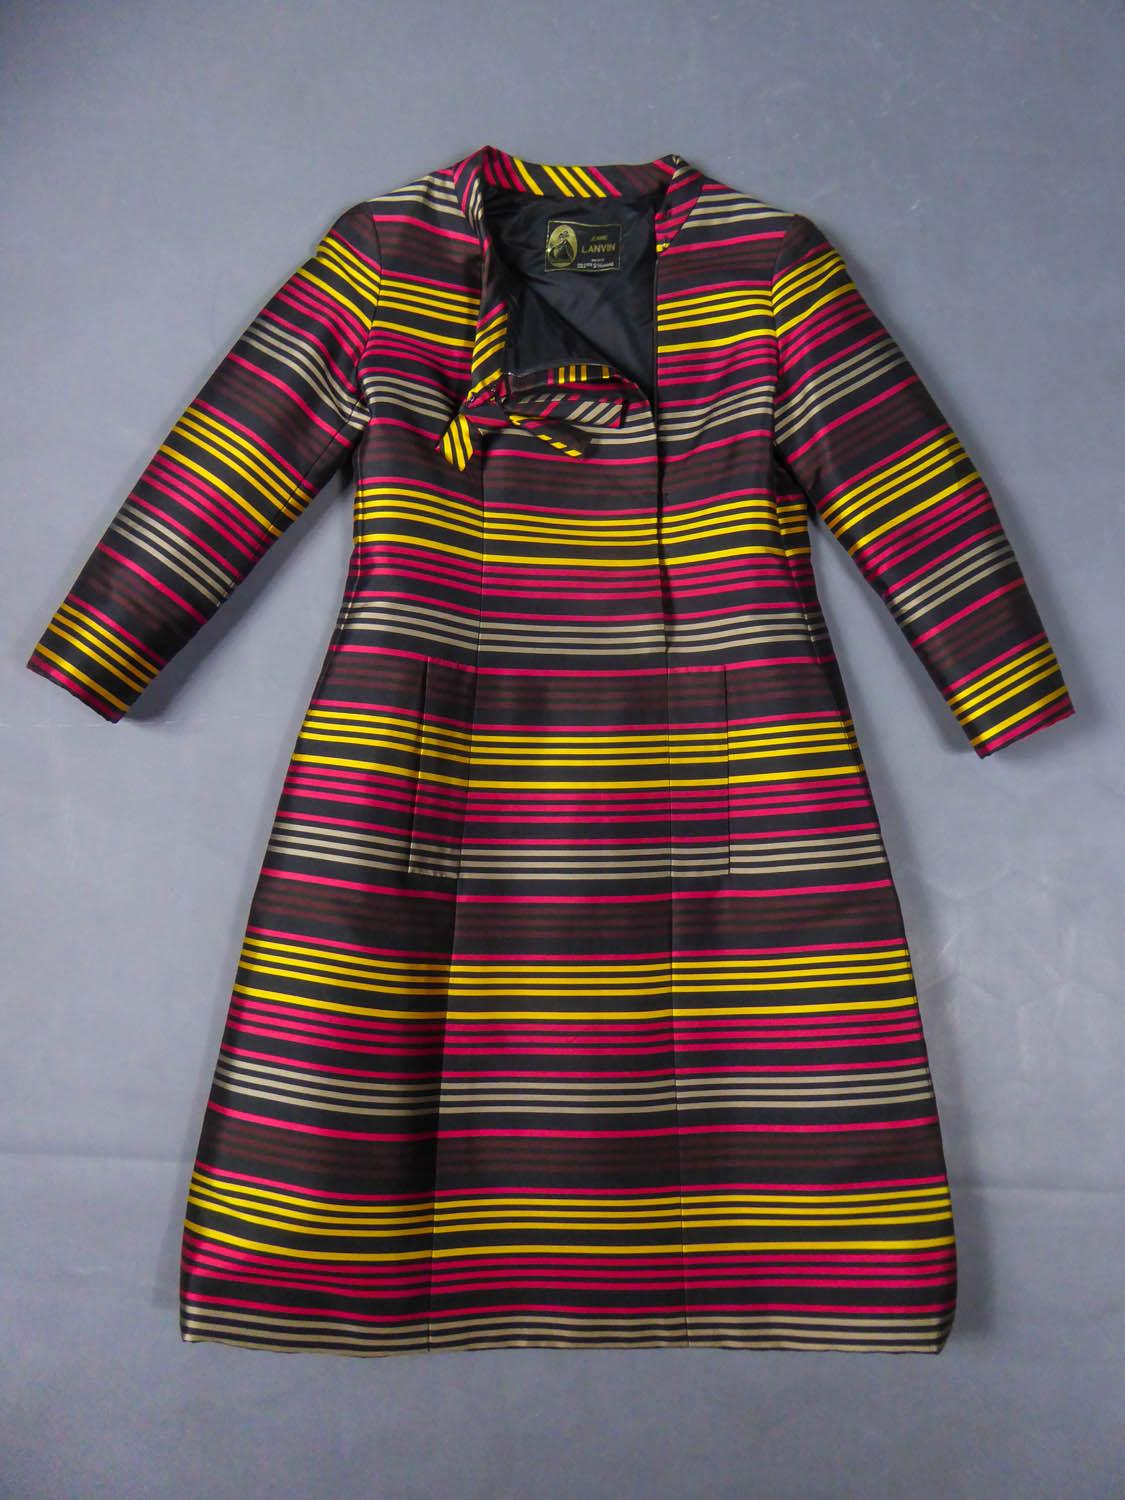 Circa 1965
France

Elegant cocktail dress in black gazar and thin stripes gold, vermilion, gray and garnet-colored from the famous Maison Lanvin directed by Jules François Grahay since 1963. Long sleeves and mandarin collar finished with a rigid